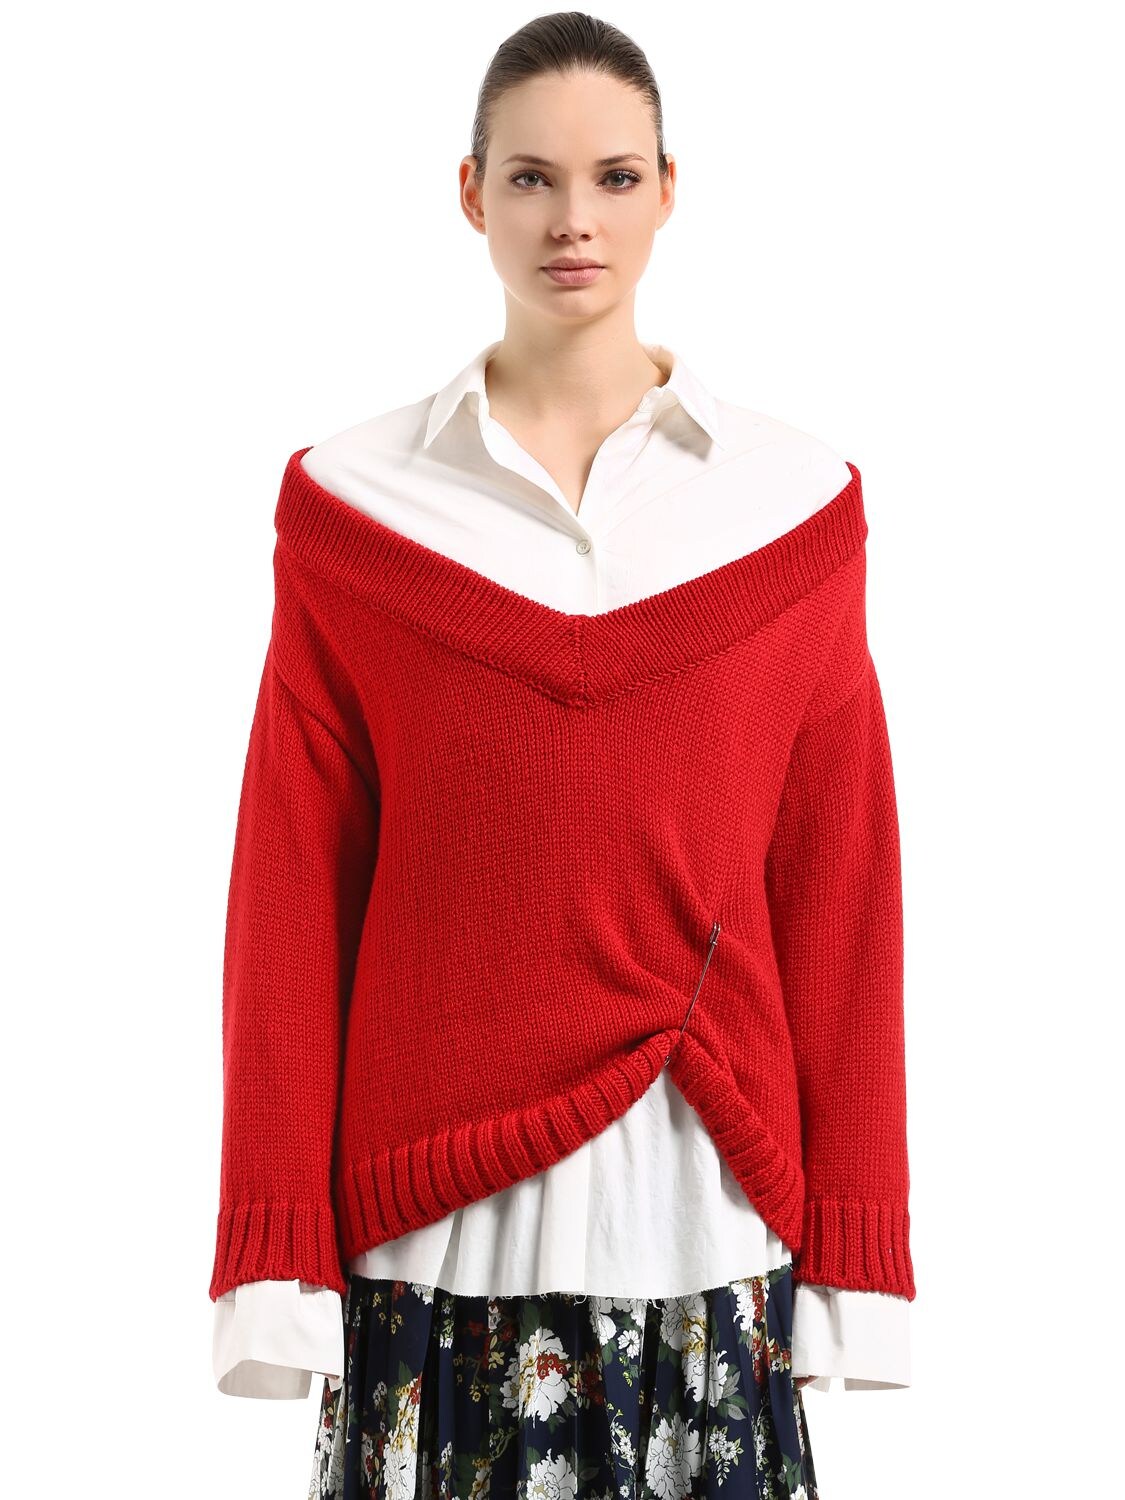 Act N°1 Oversized Wool Sweater & Cotton Shirt In Red,white